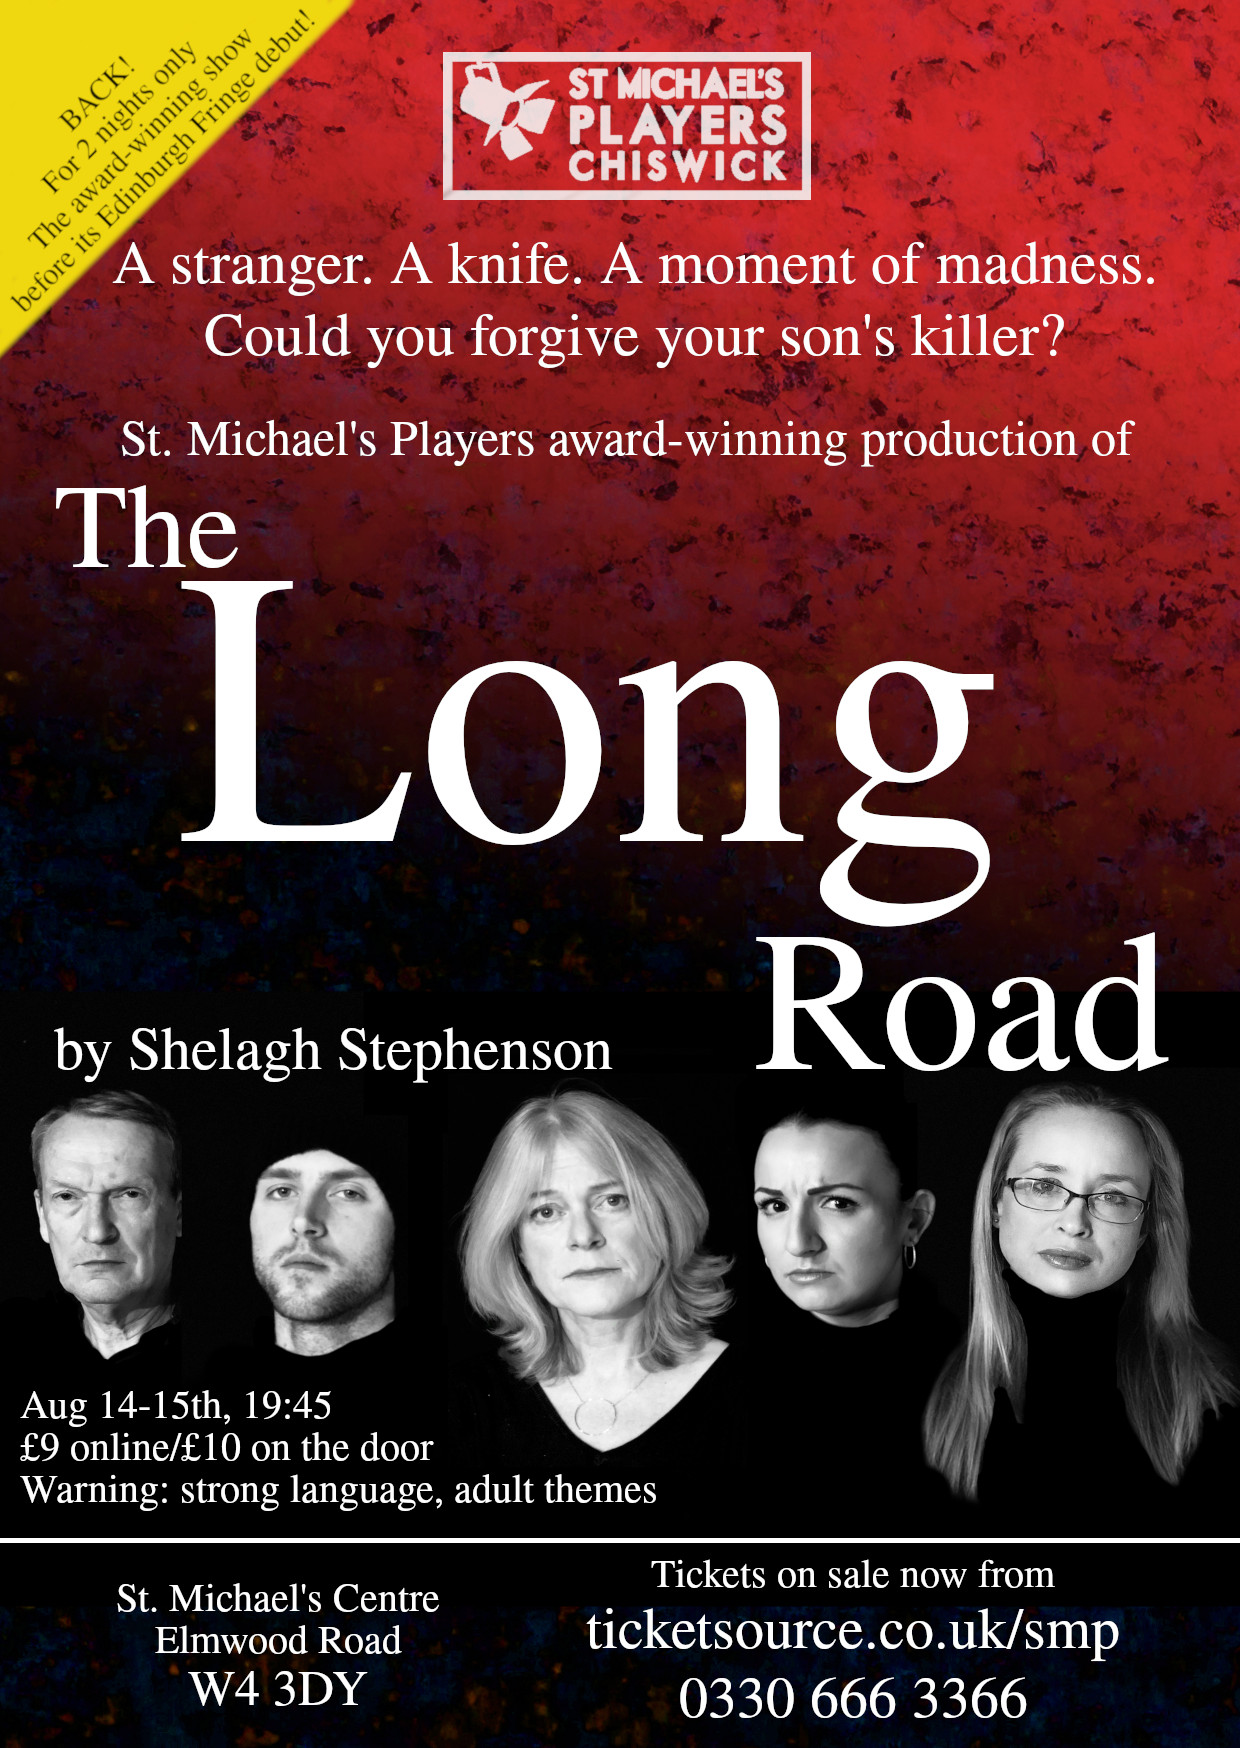 The Long Road by Shelagh Stephenson